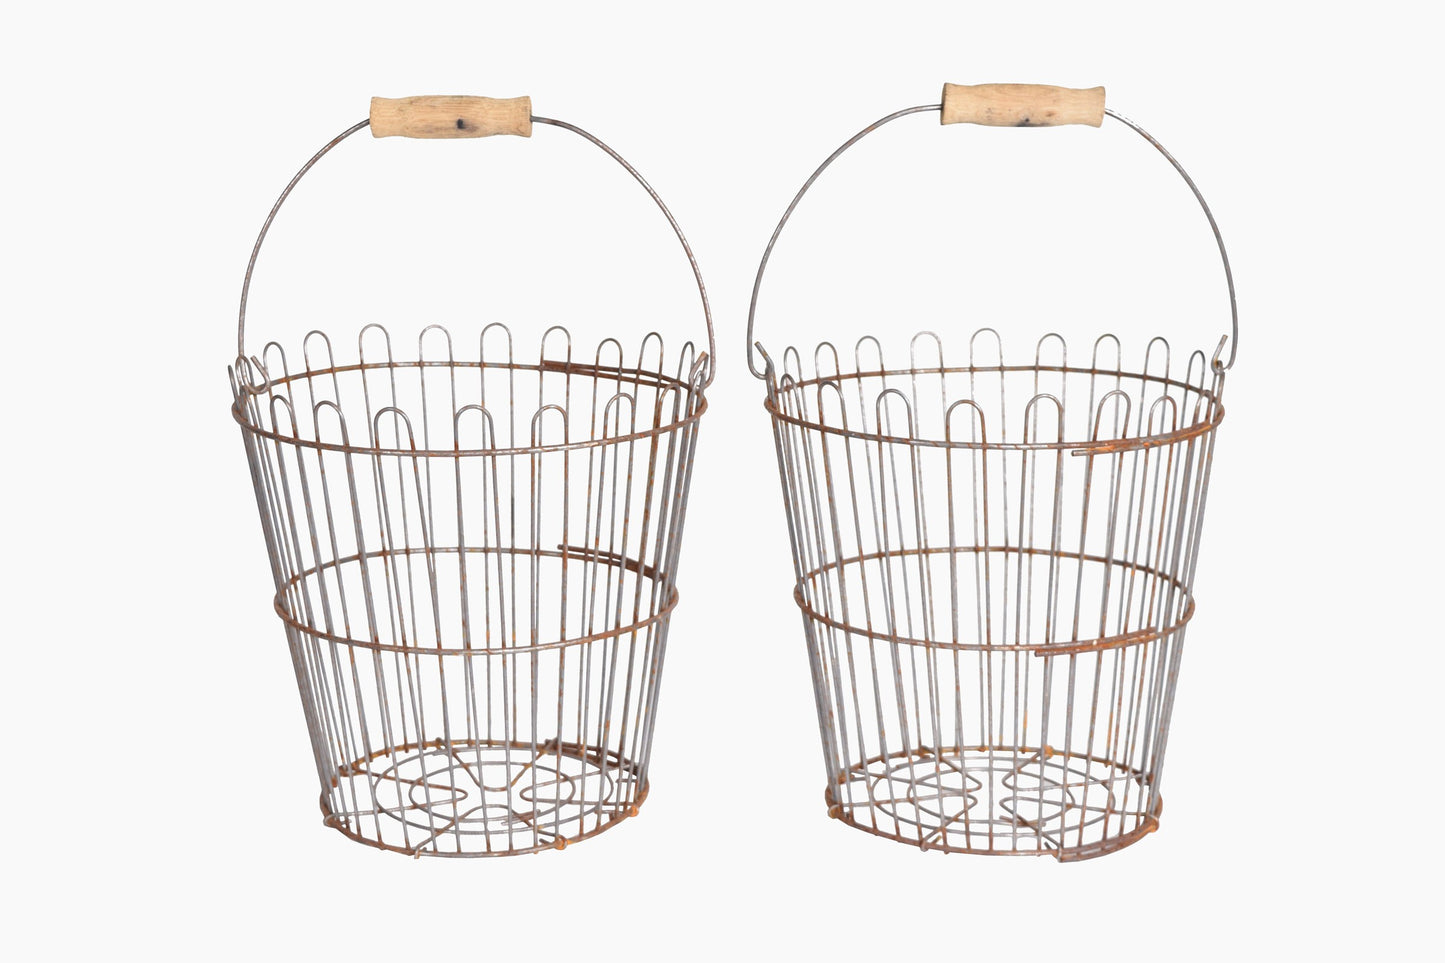 A pair of metal wire baskets with wooden handles